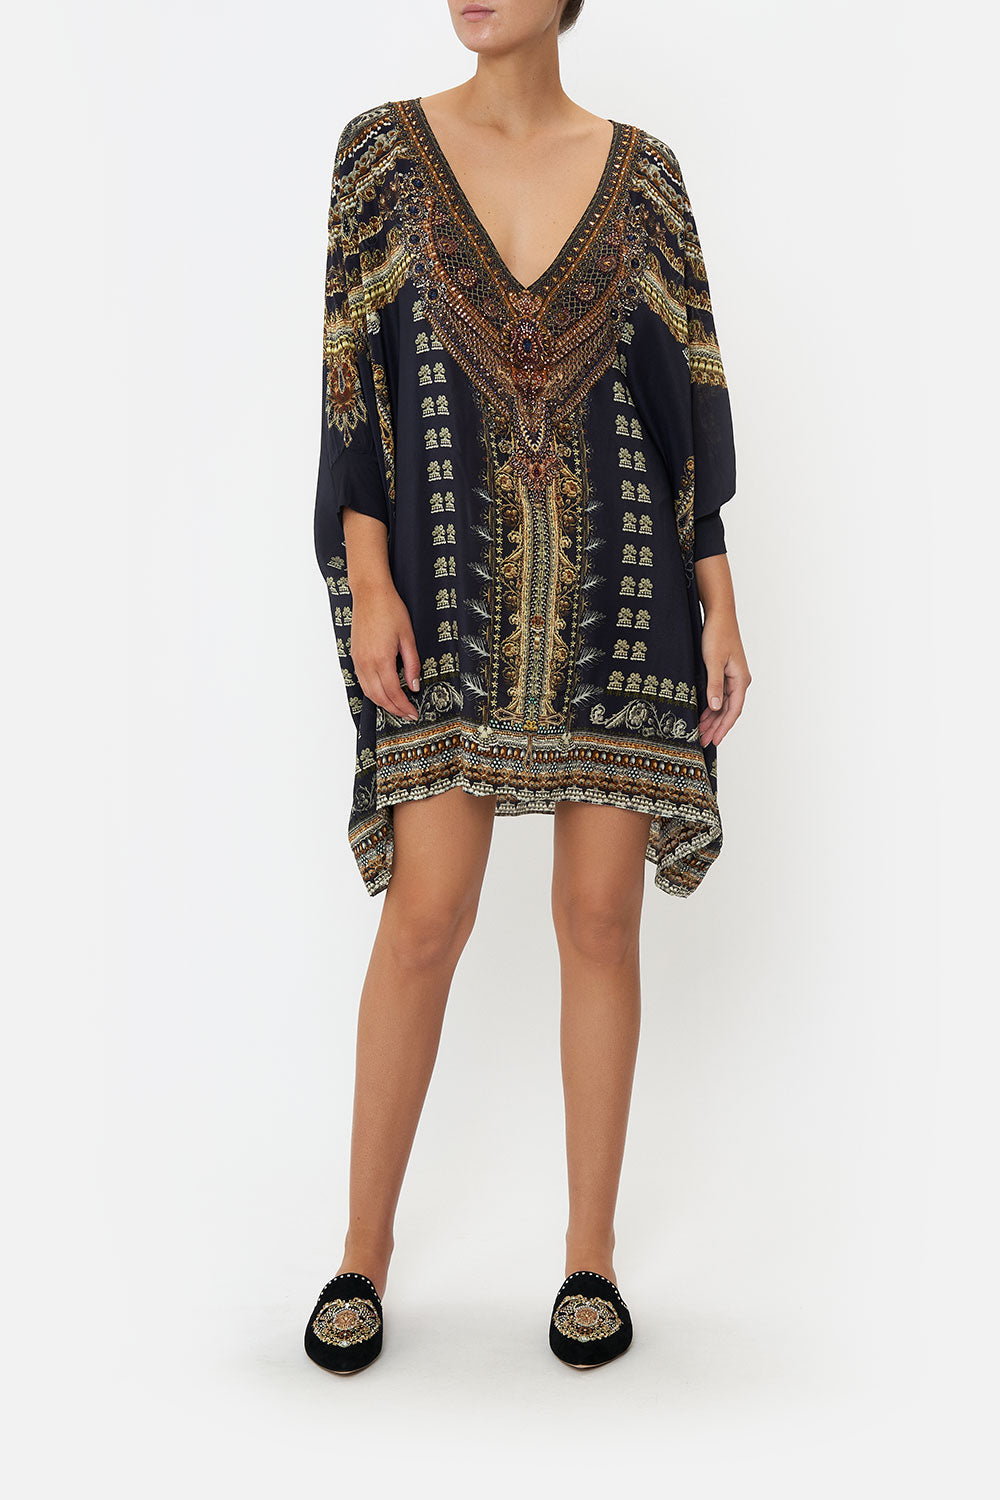 SHORT KAFTAN WITH CUFF ITS ALL OVER TORERO